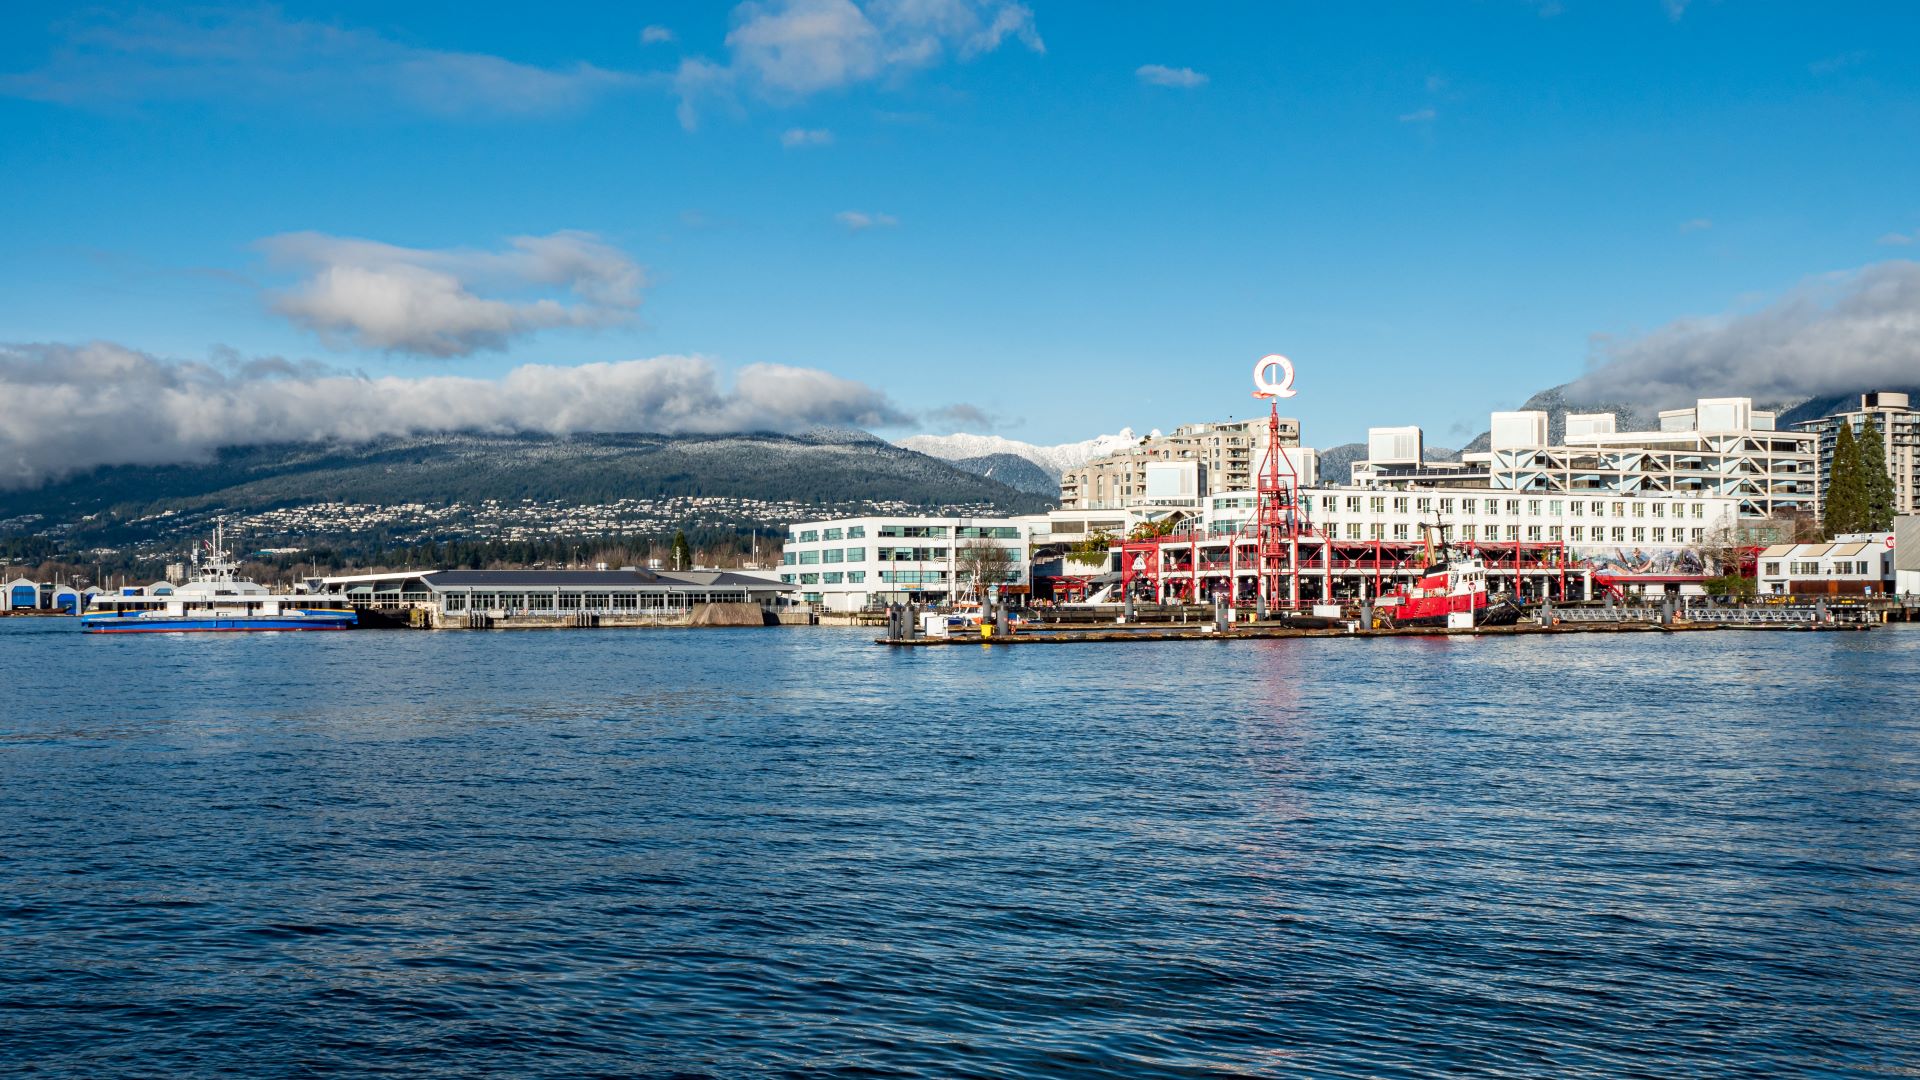 Panoramic view of Lonsdale Quay, SeaBus parked